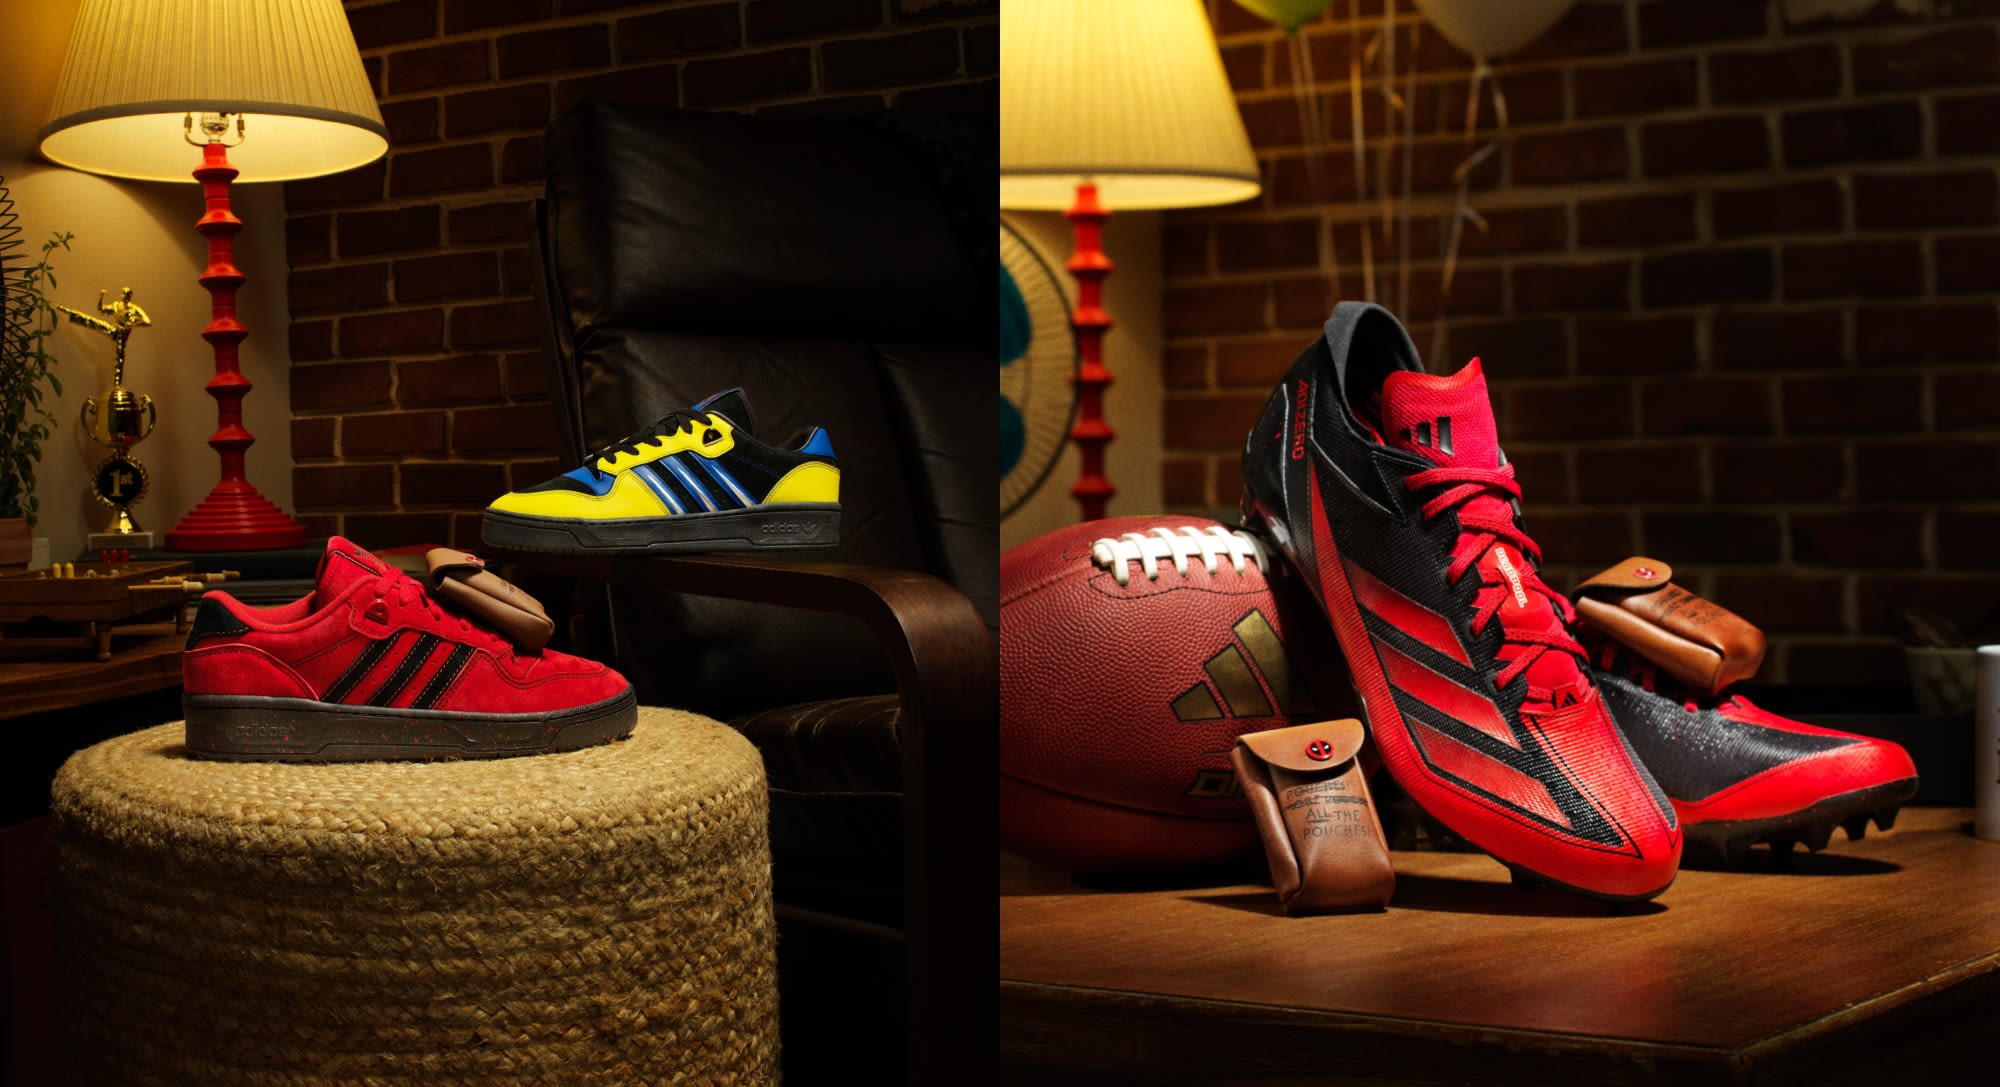 Adidas Partners With Marvel Studios for ‘Deadpool & Wolverine’Collection Featuring Several Shoes